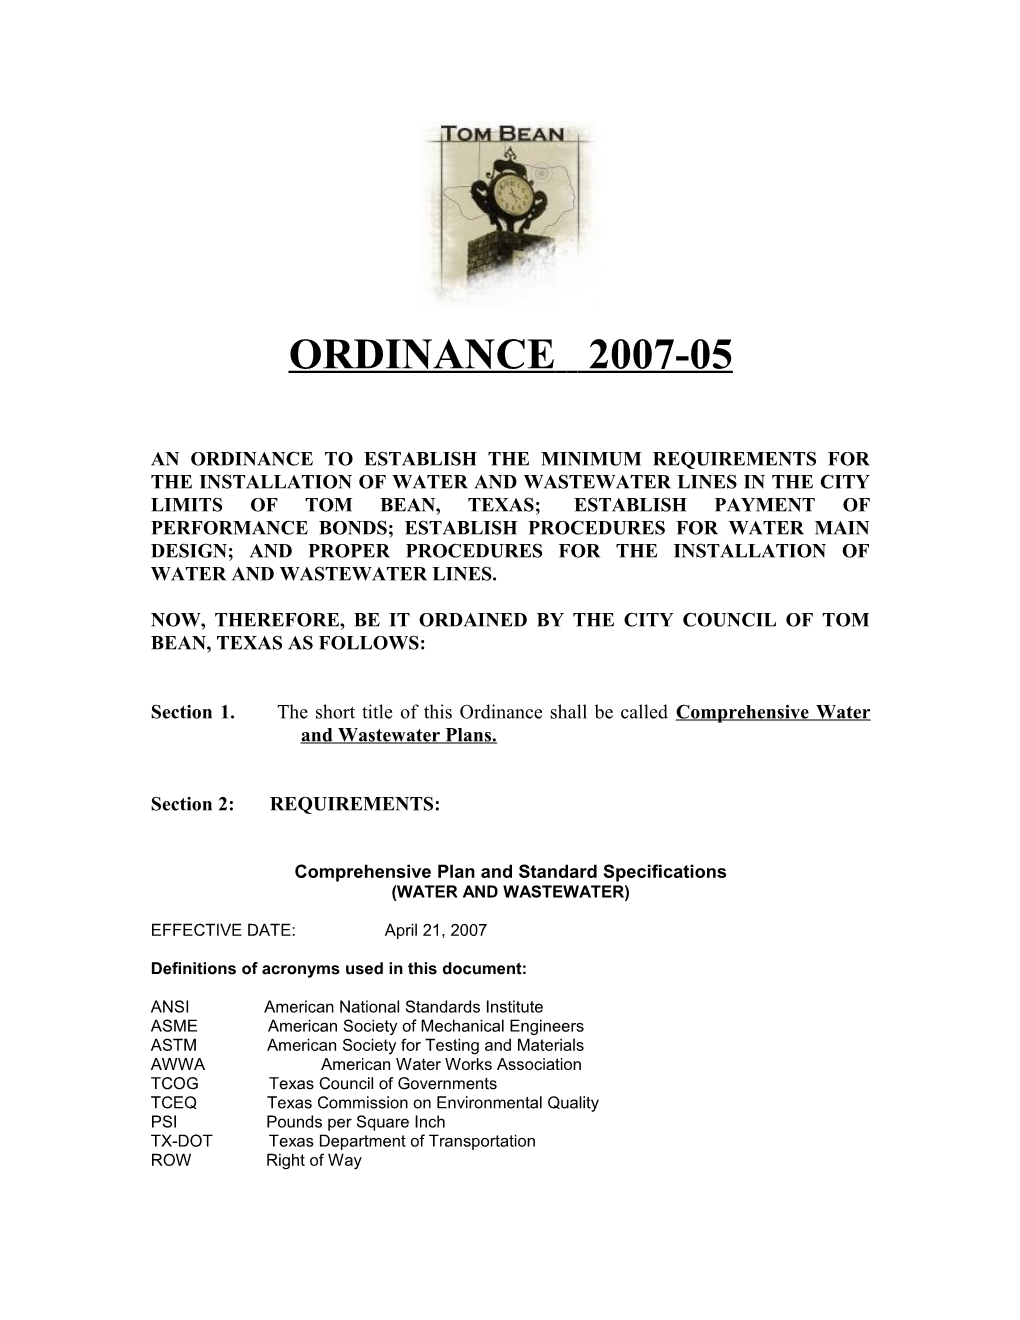 Now, Therefore, Be It Ordained by the City Council of Tom Bean, Texas As Follows